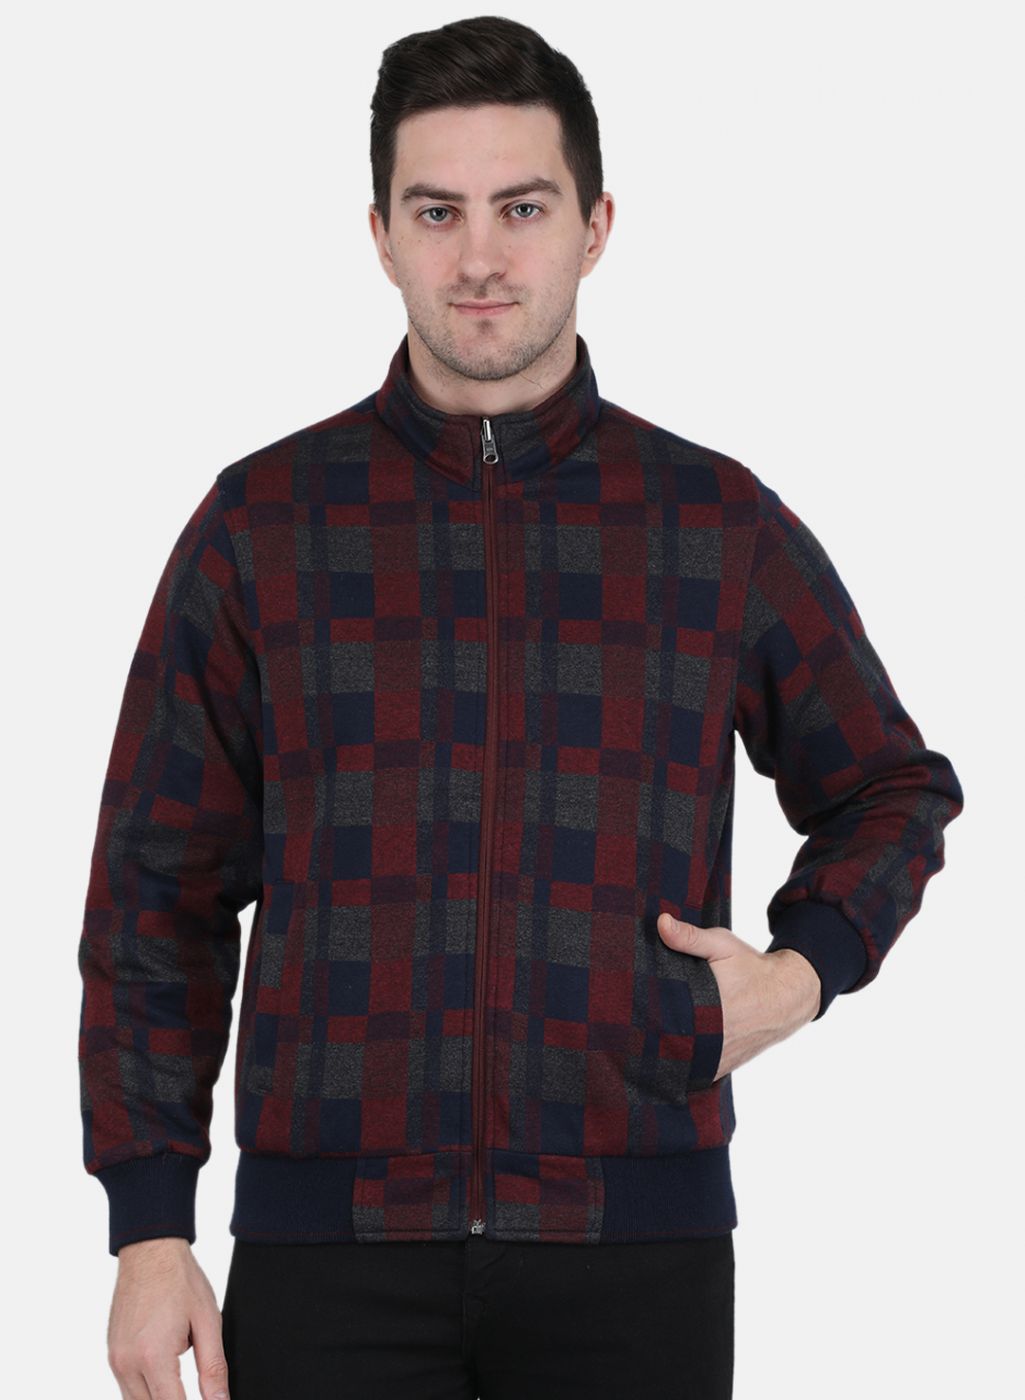 Buy SELECTED Red & Black Checked Woollen Jacket - Jackets for Men 1088401 |  Myntra